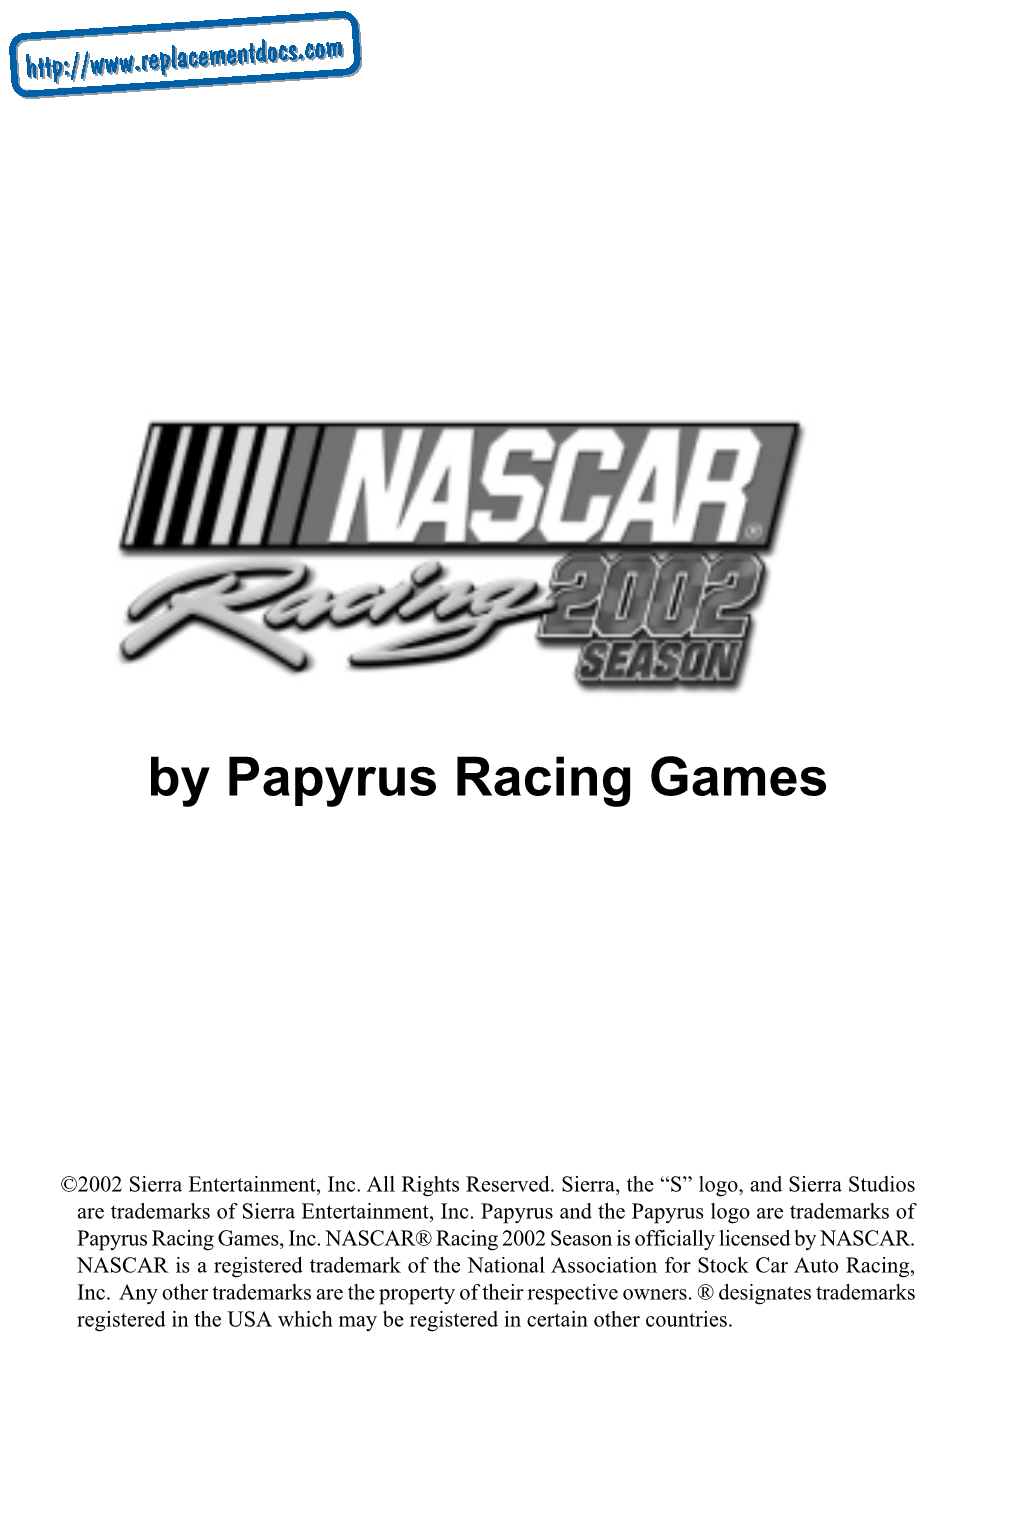 By Papyrus Racing Games